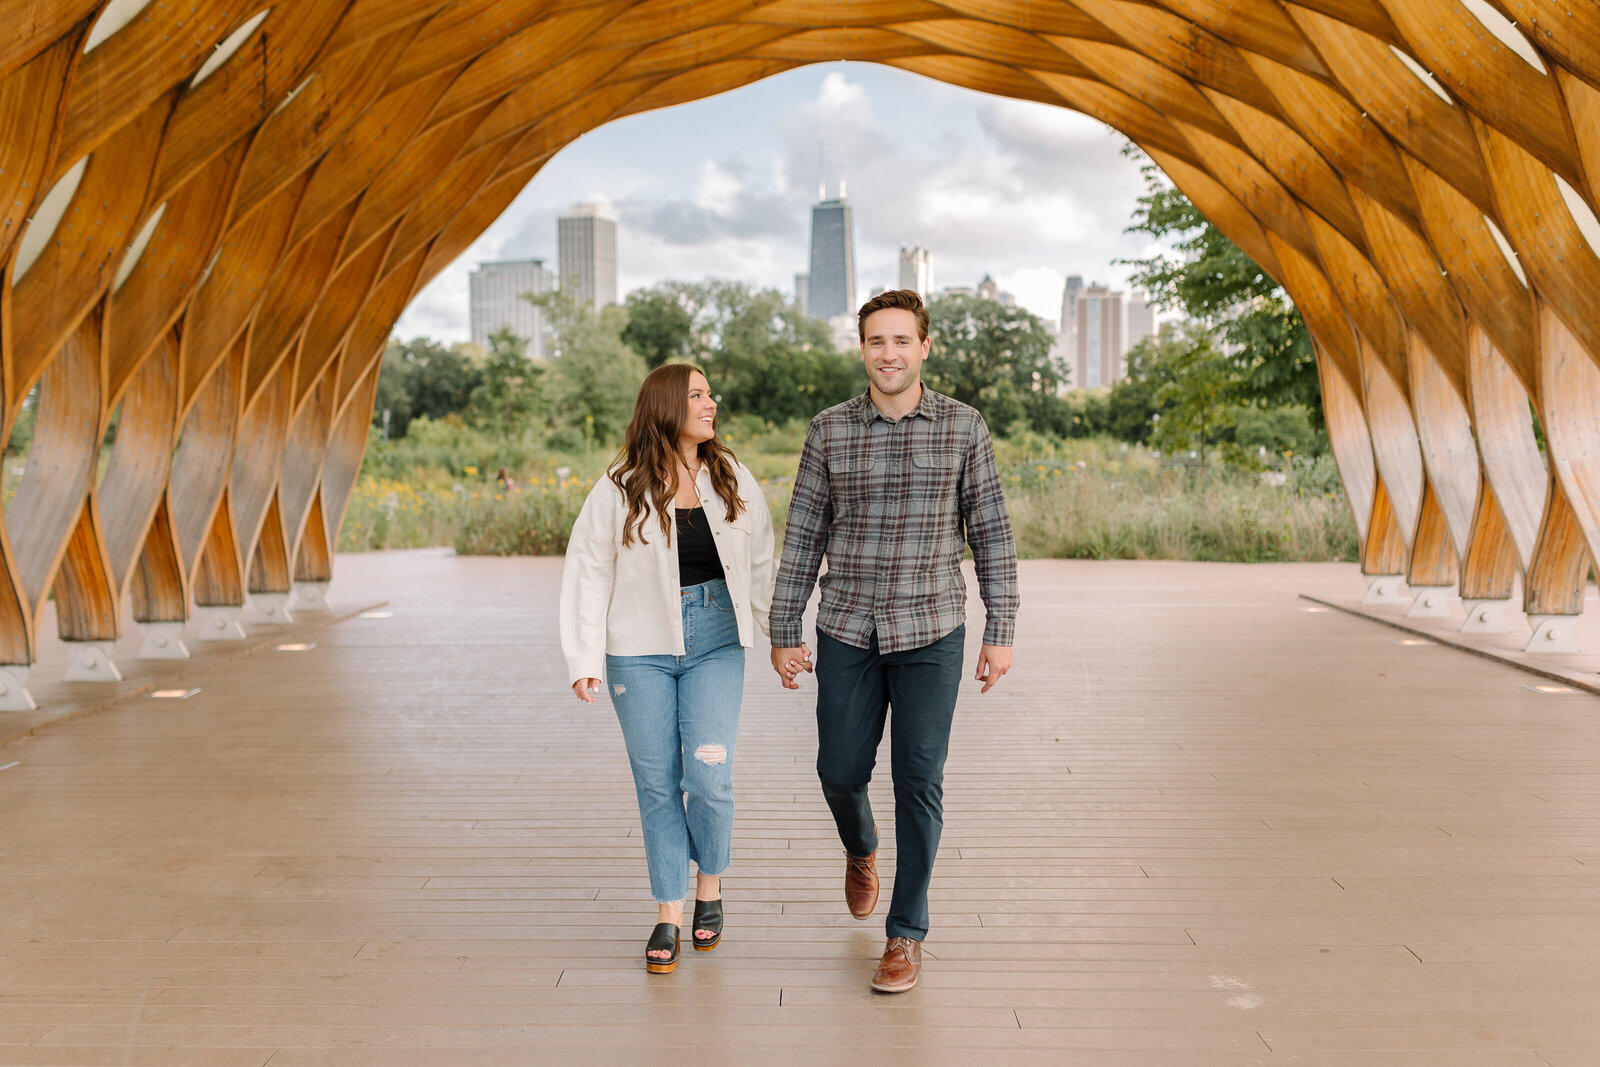 Young couple walking together while holding hands under the honeycomb sculpture in Chicago